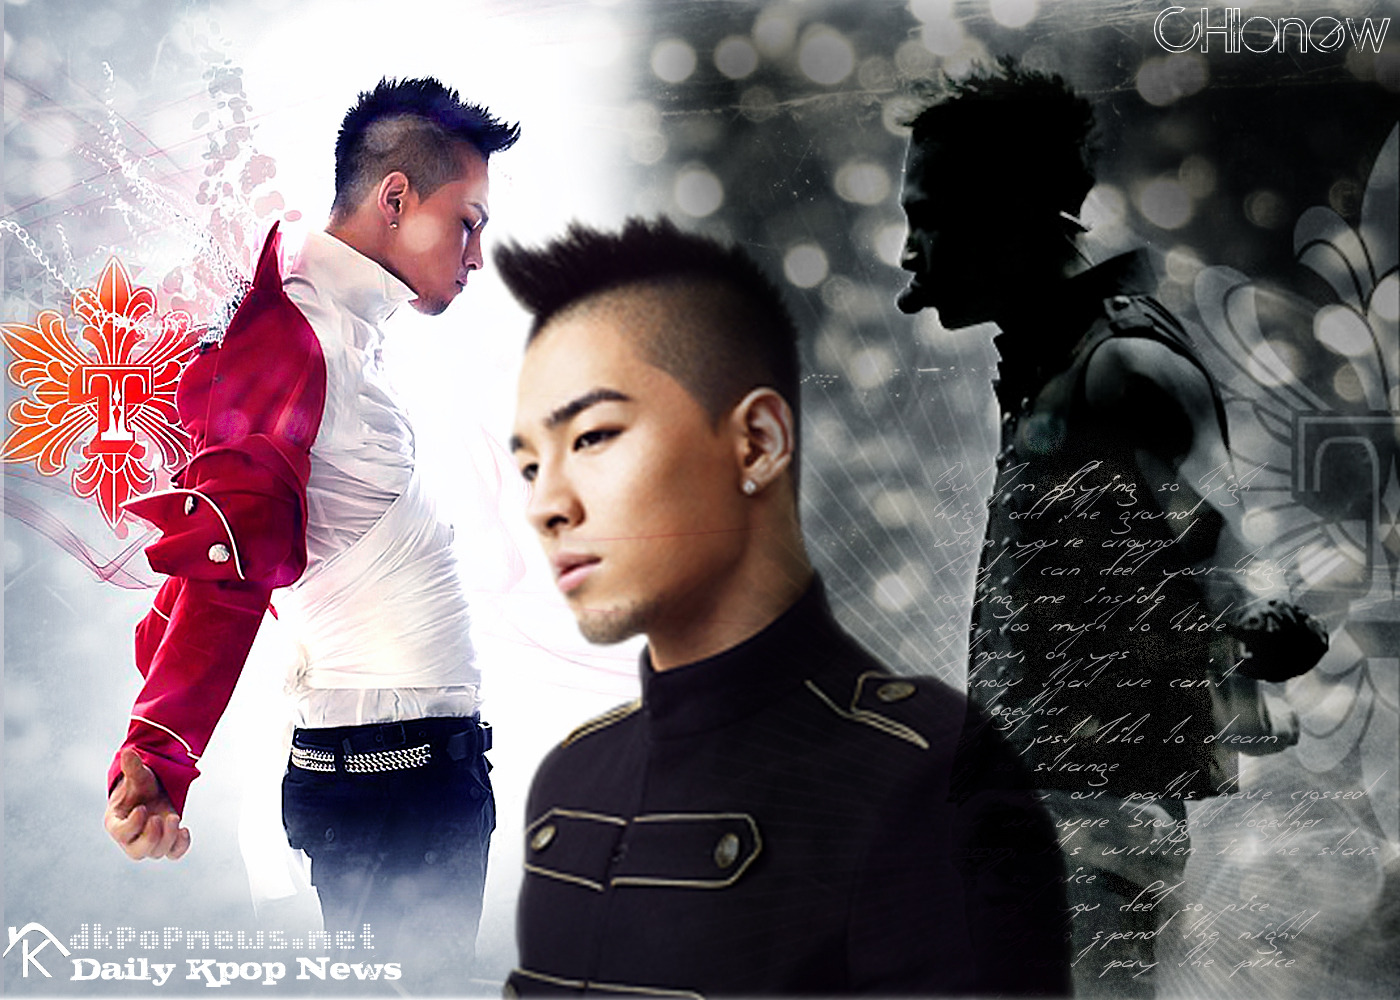 Taeyang-CHIonew | Daily K Pop Wallpapers